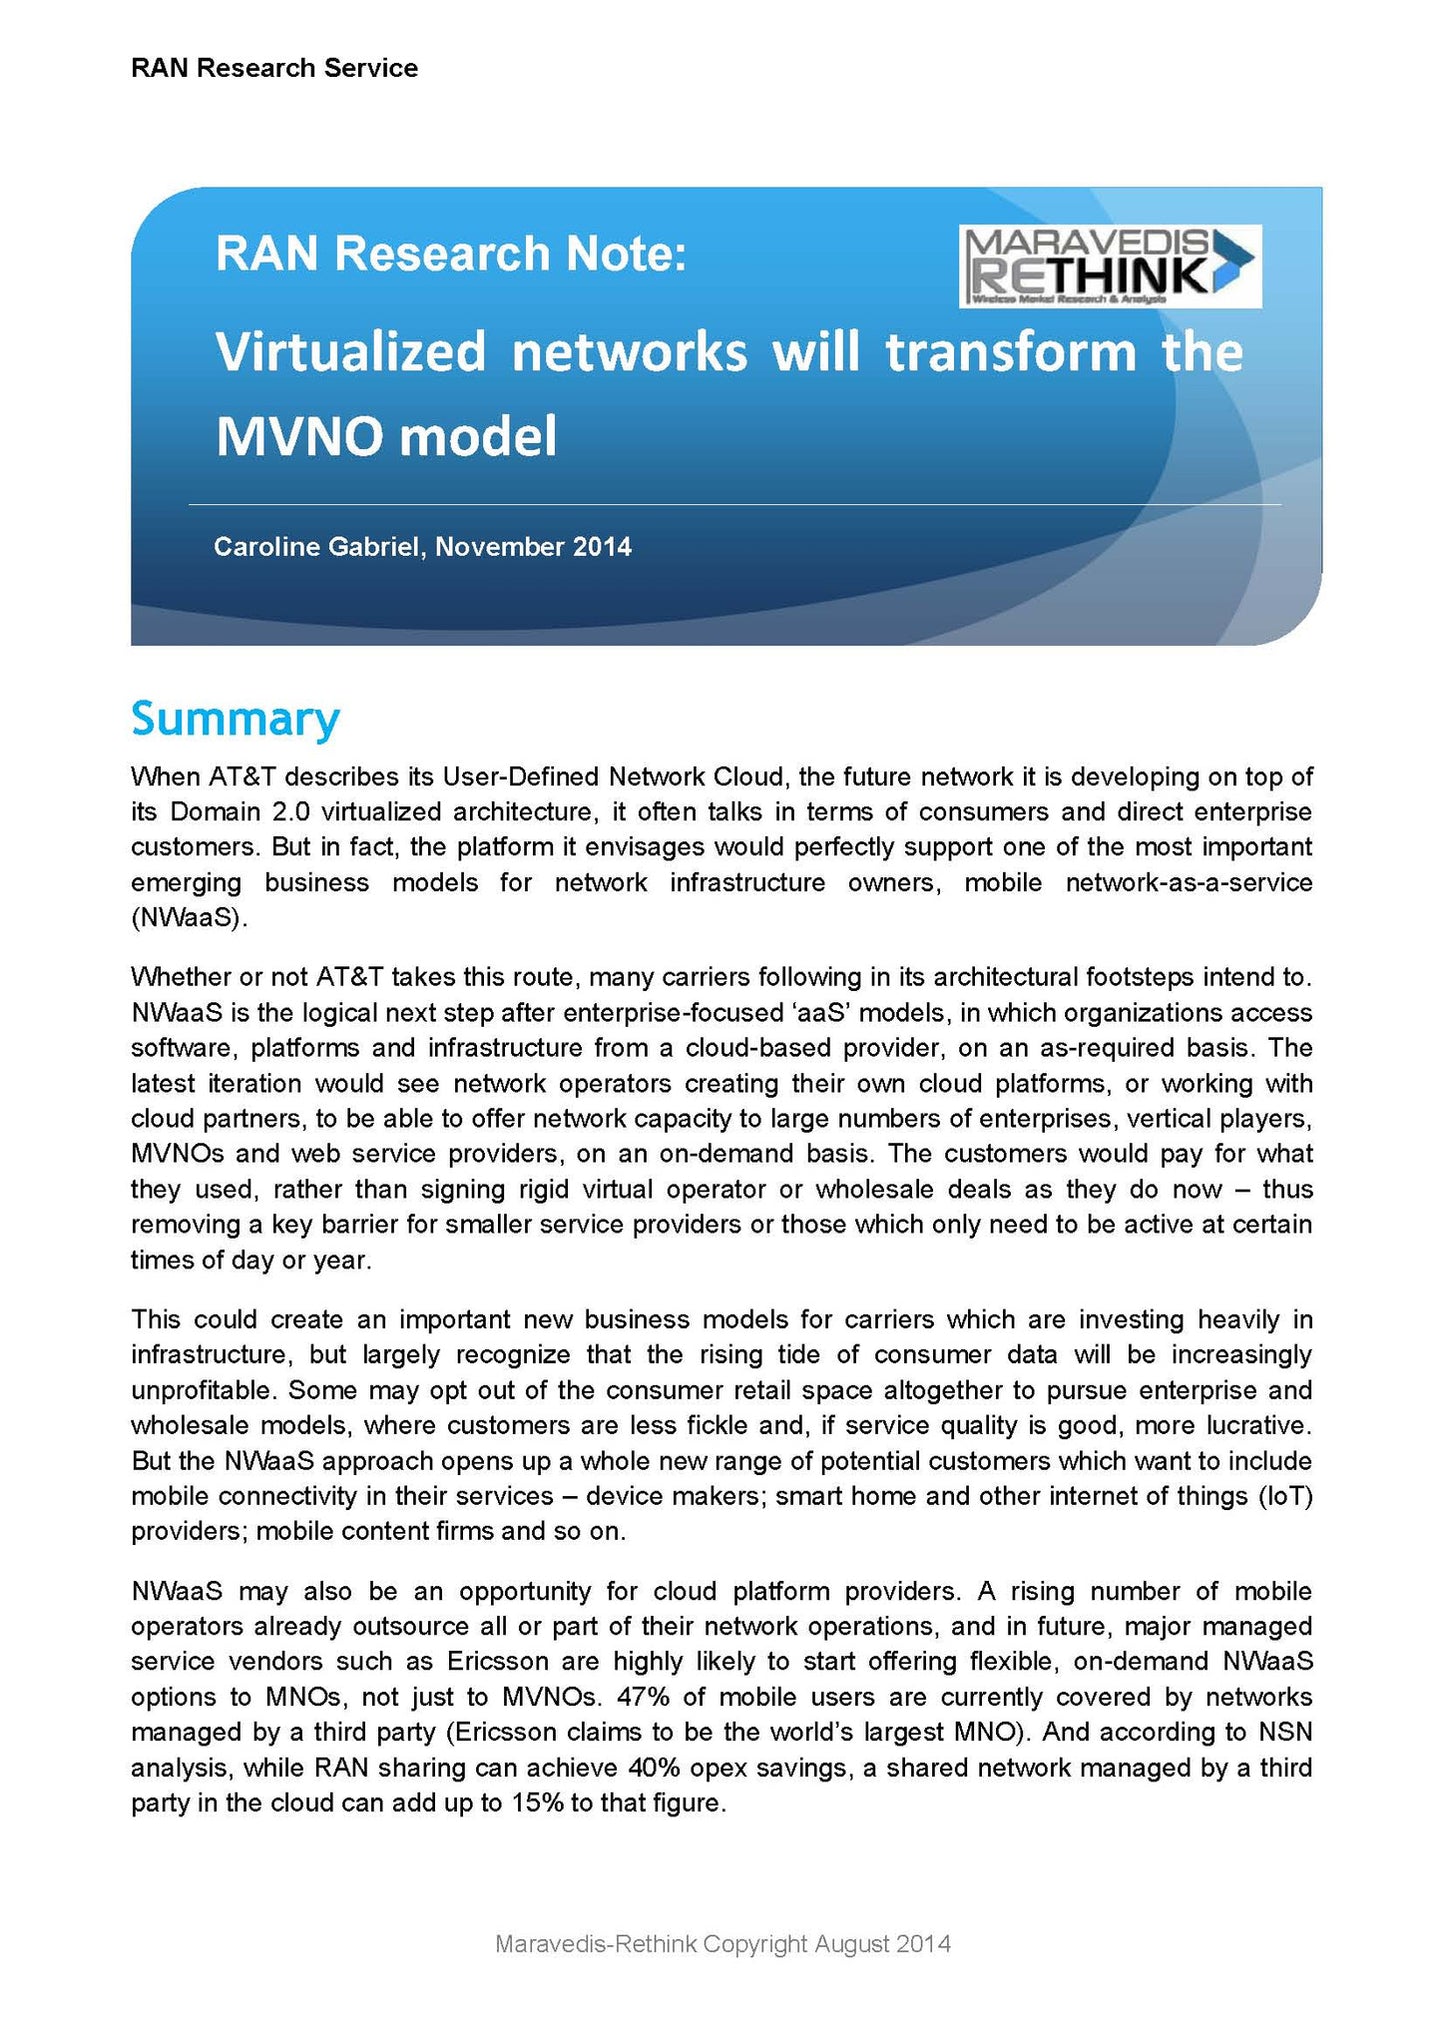 RAN Research Note: Virtualized networks will transform the MVNO model